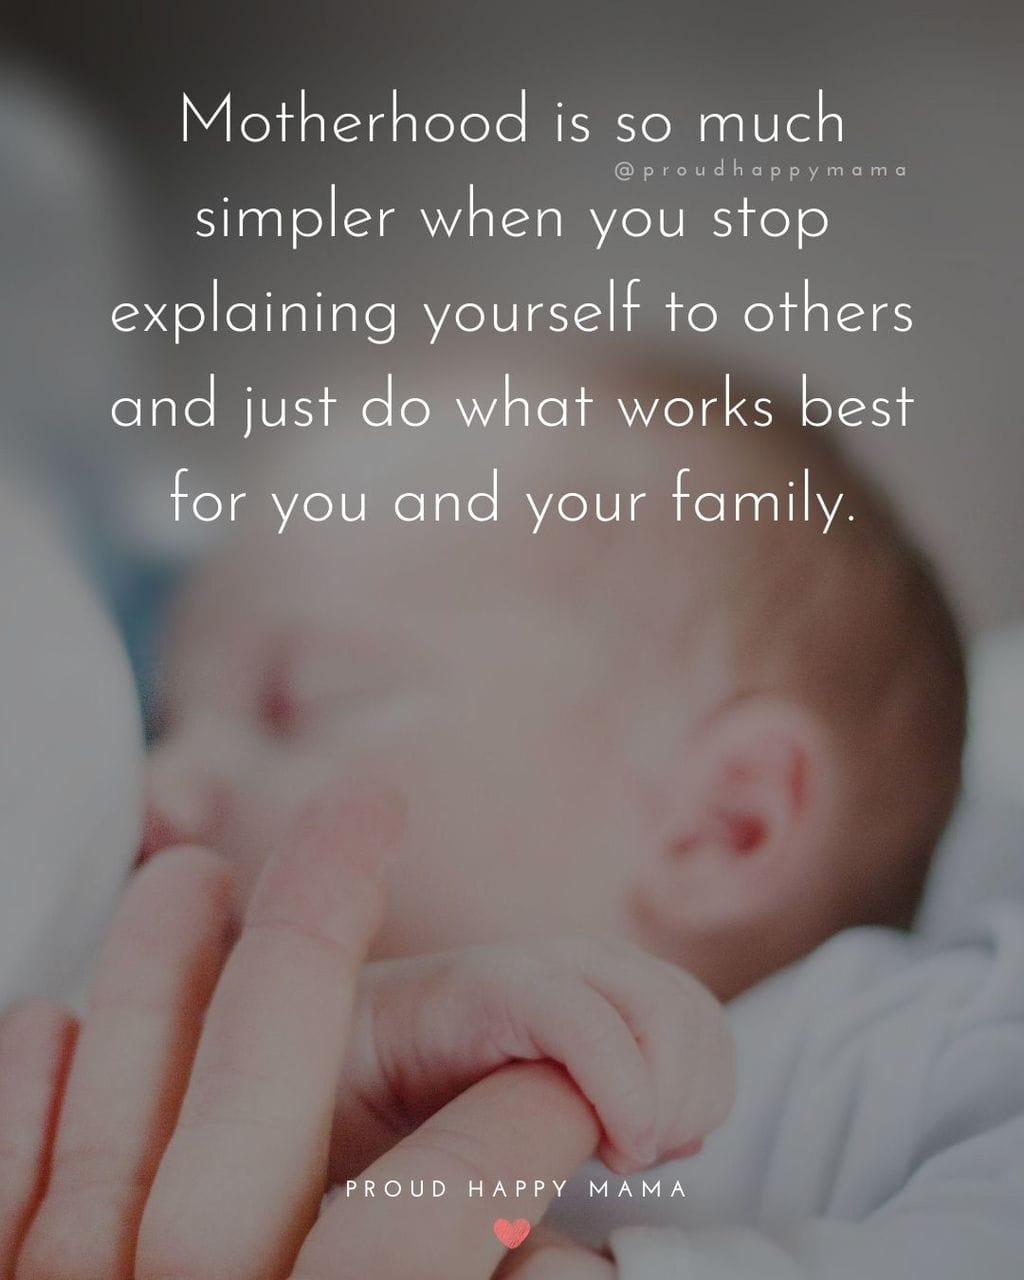 Quotes - Family | Motherhood is so much simpler when you stop explaining yourself to others and just do what works best for you and your family.